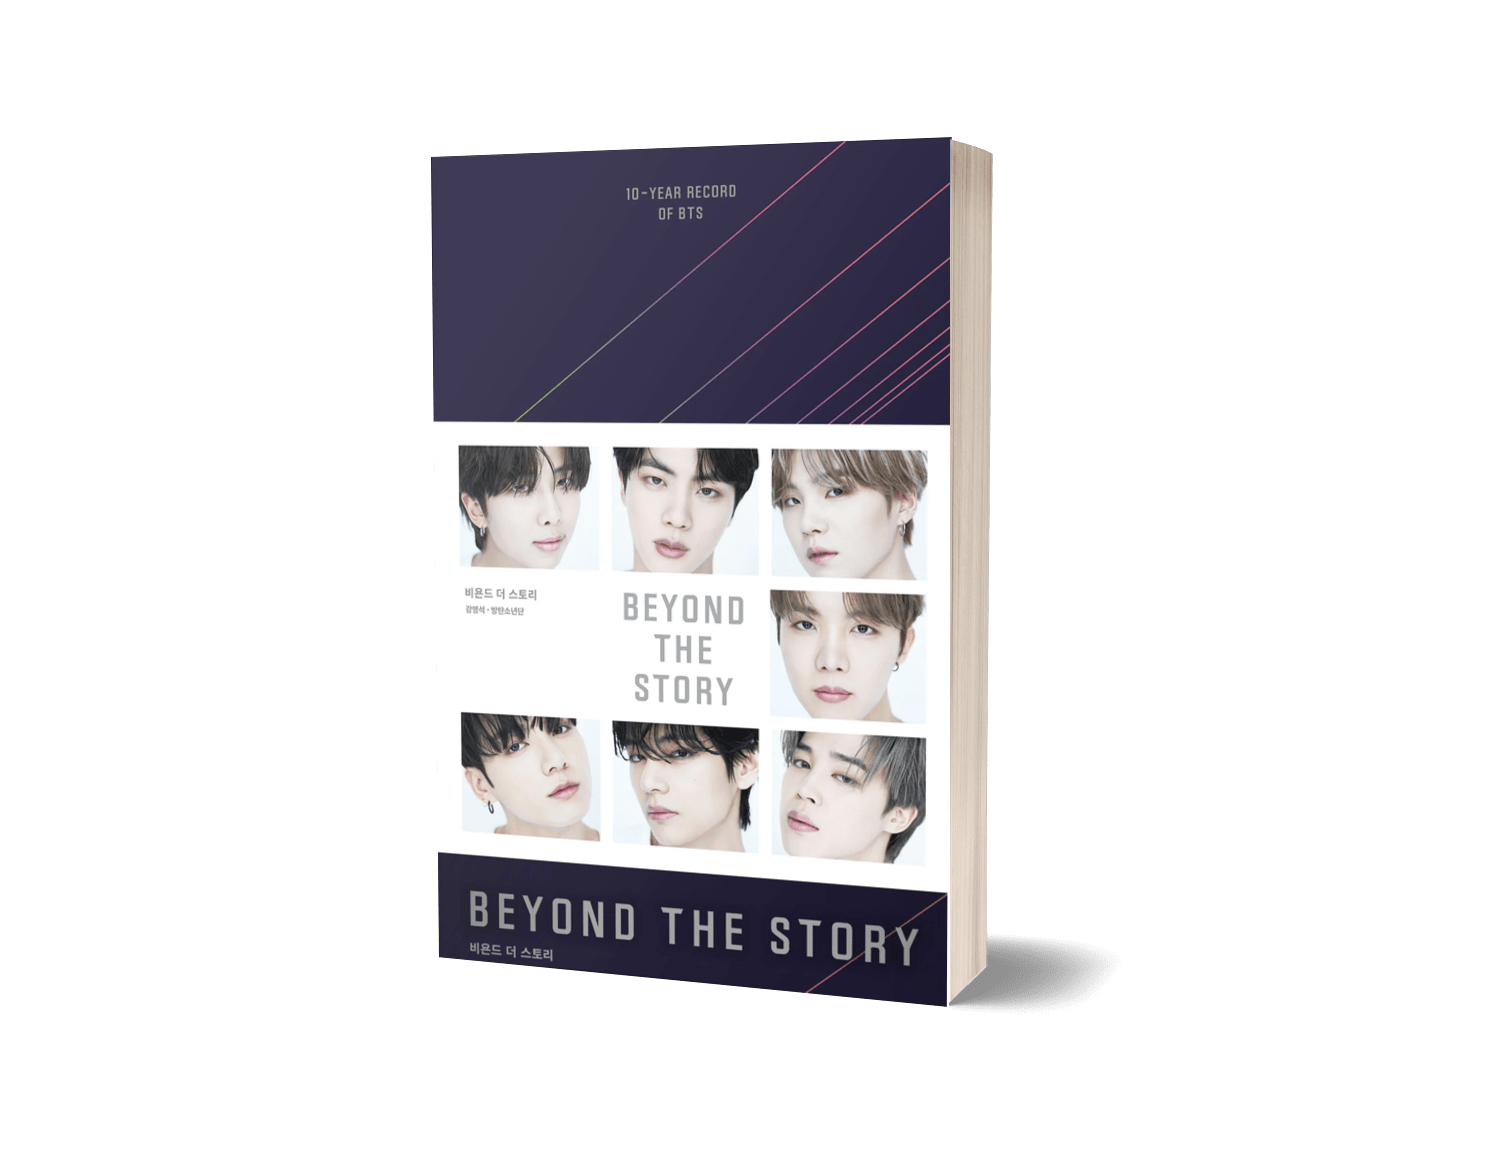 Beyond the Story: 10-Year Record of BTS by Myeongseok Kang